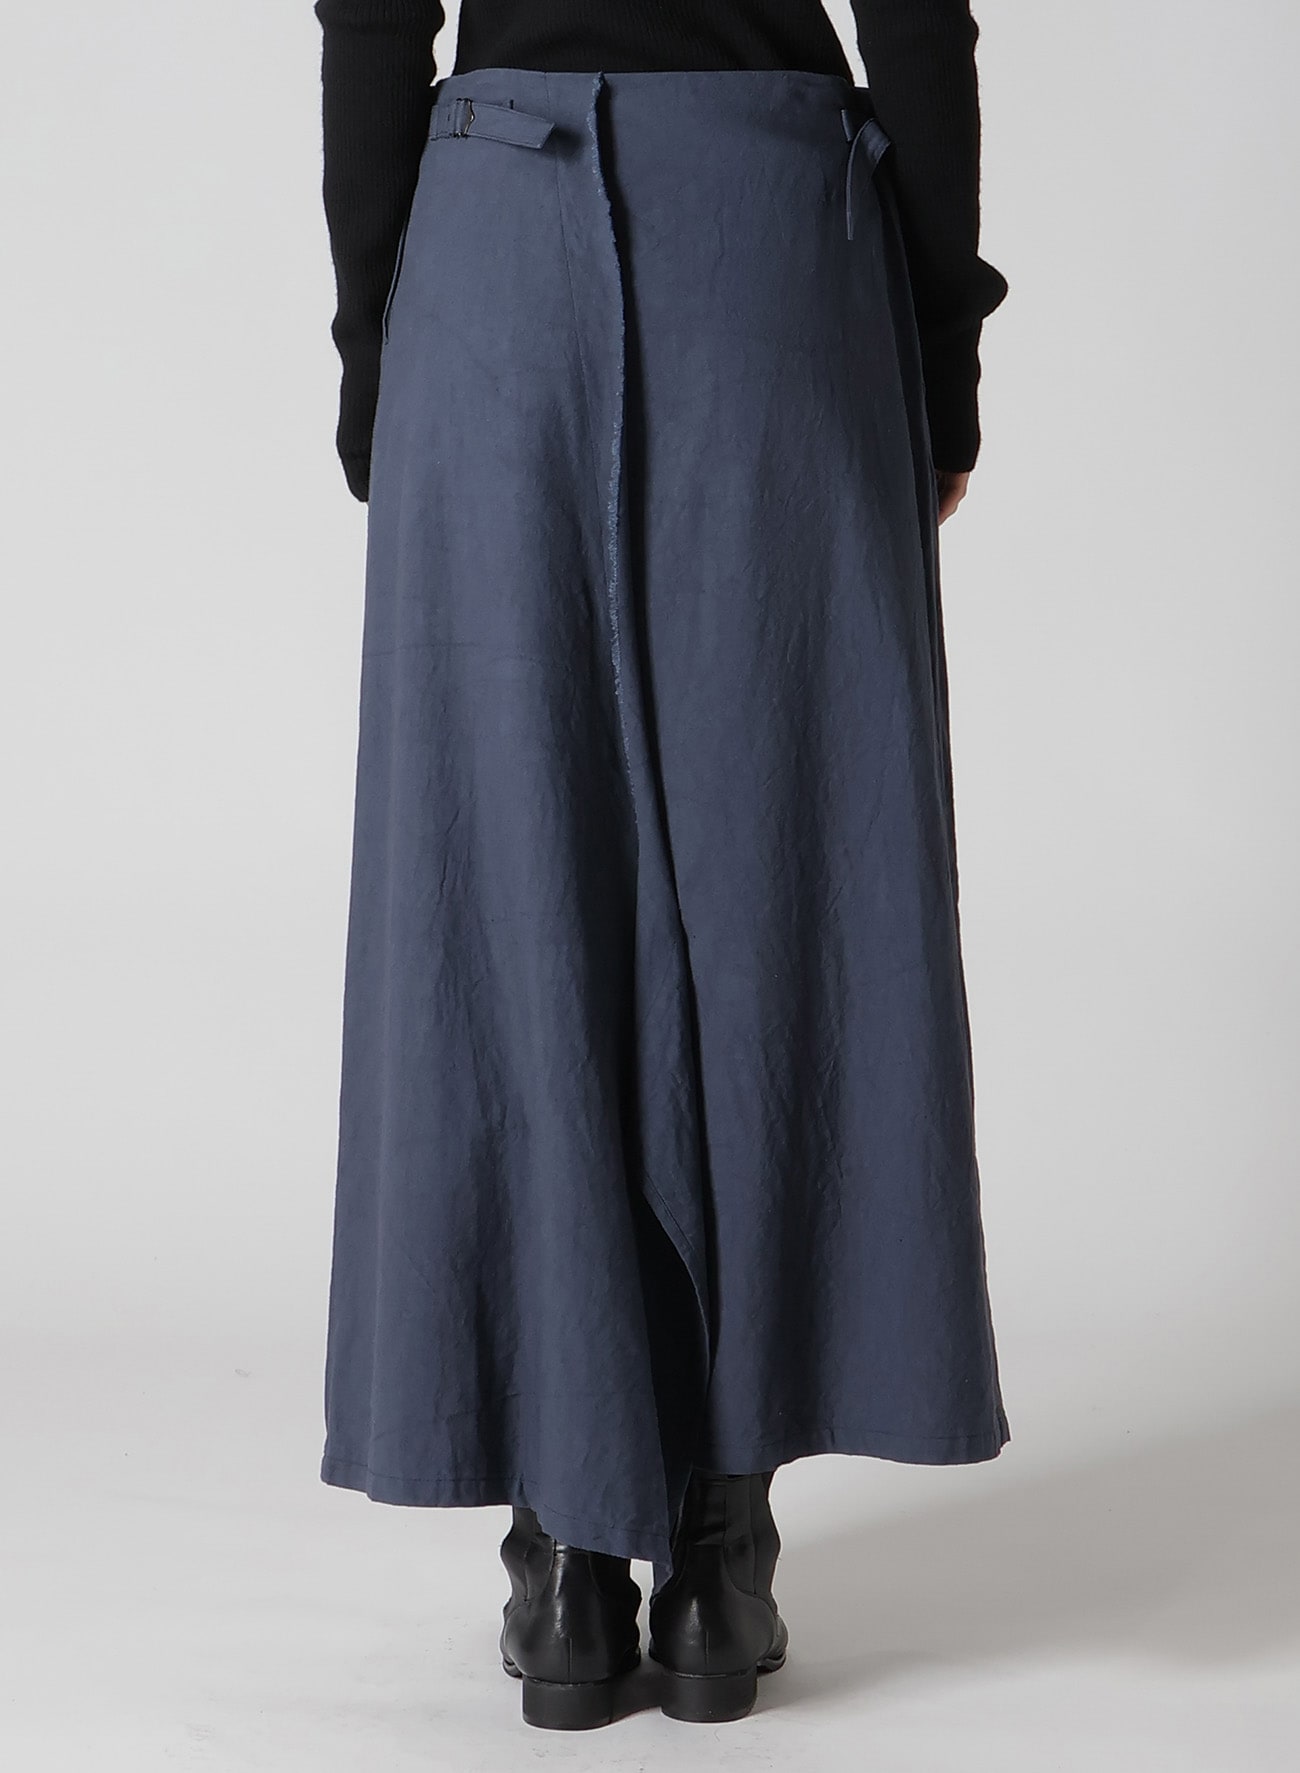 【8/2 12:00 Release】TWILL GARMENT WASH LEFT SIDE PATCH SKIRT PANTS